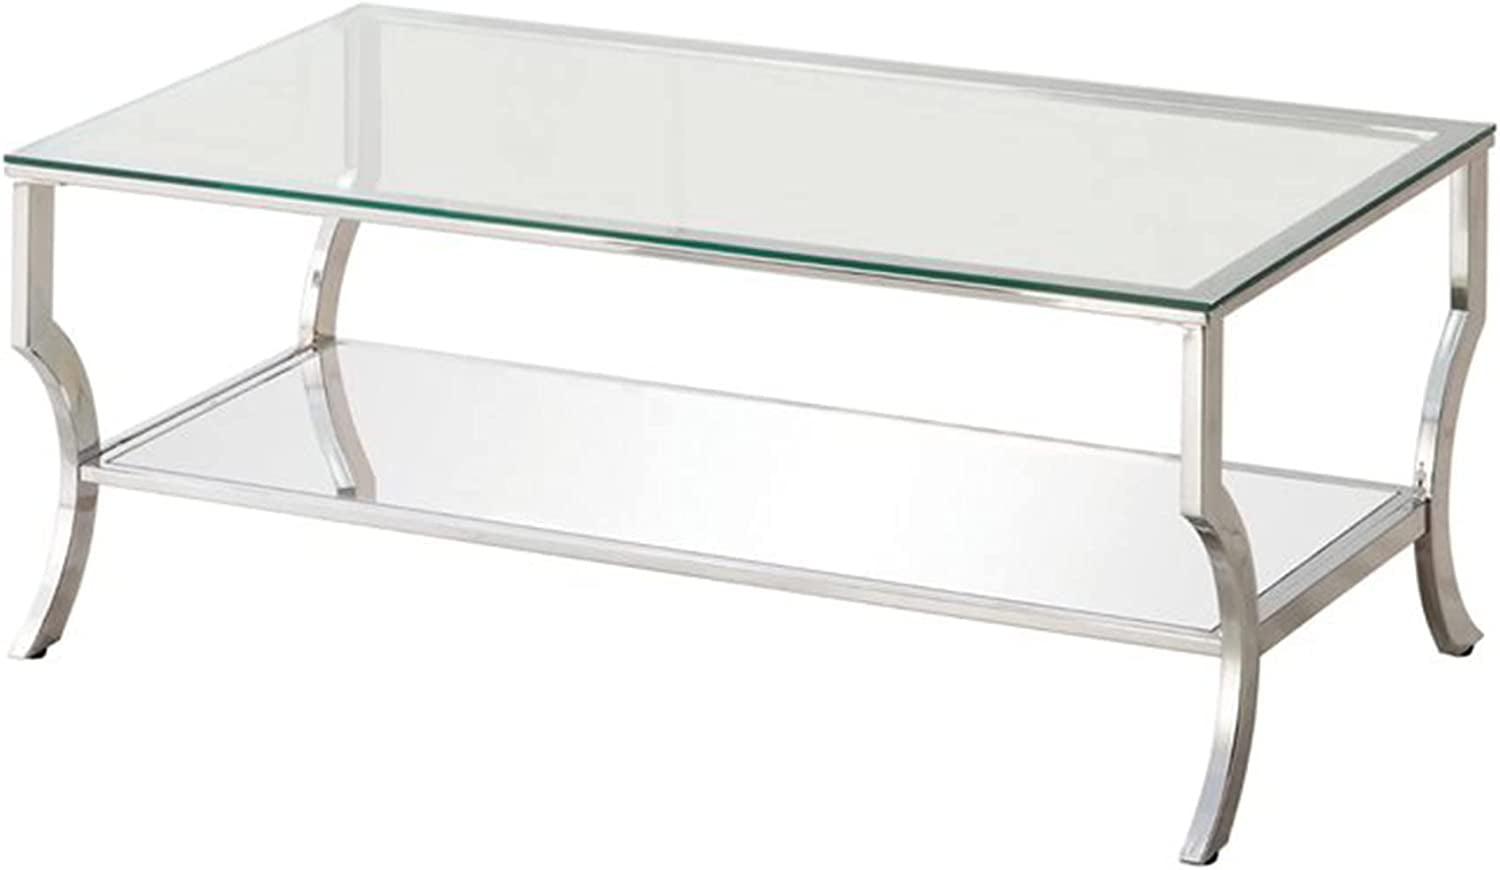 Chic Mirage 24" Rectangular Chrome Coffee Table with Glass Top and Mirrored Shelf